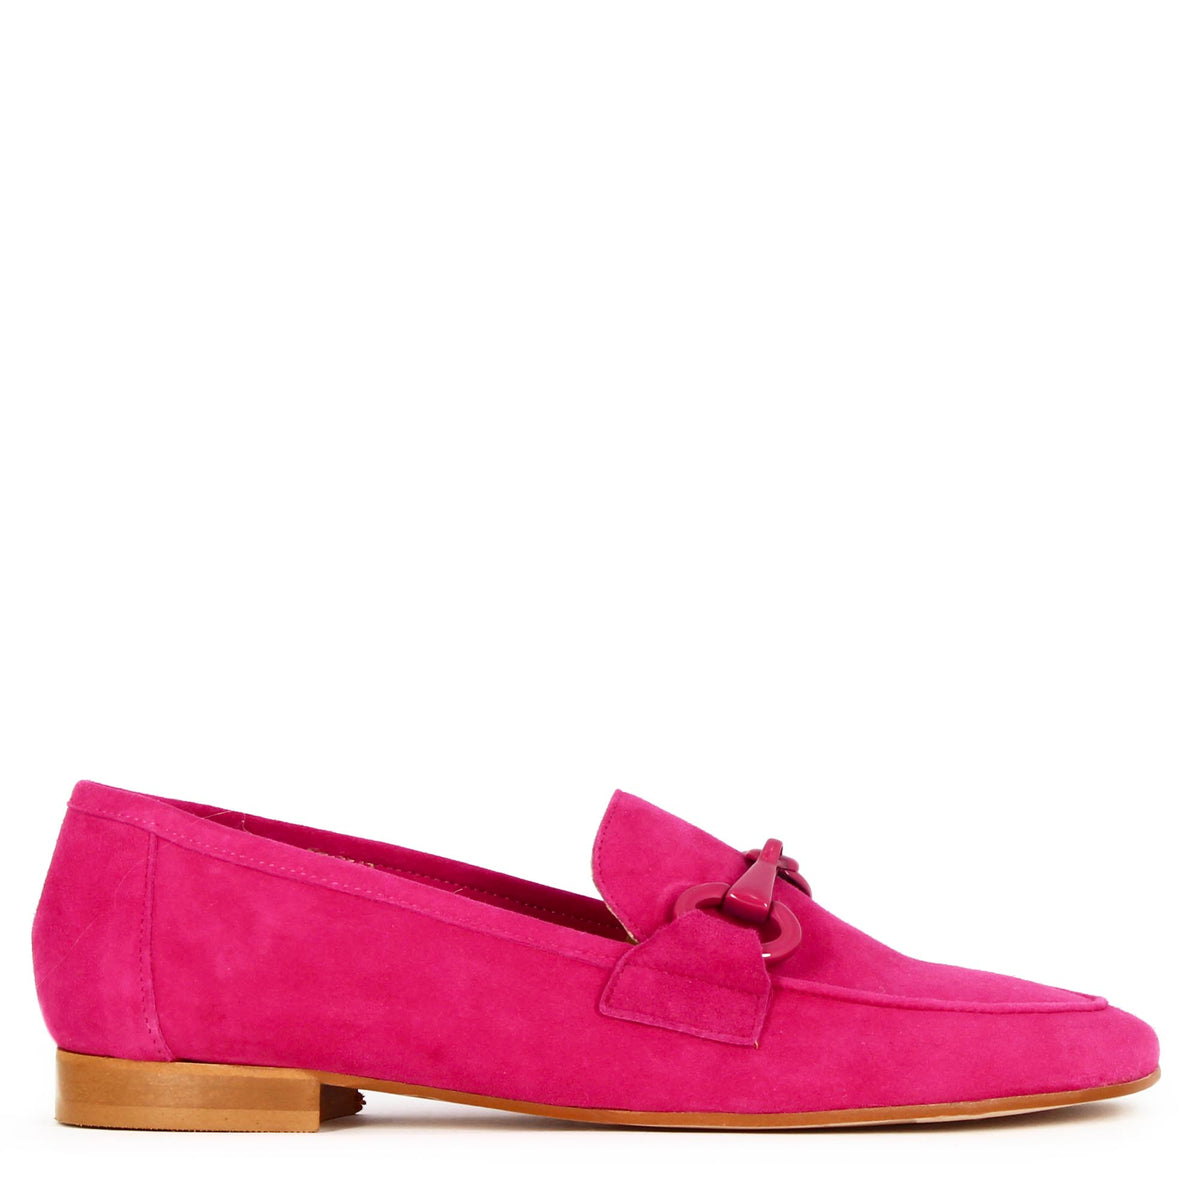 Women's moccasin in suede with horsebit in fuchsia color